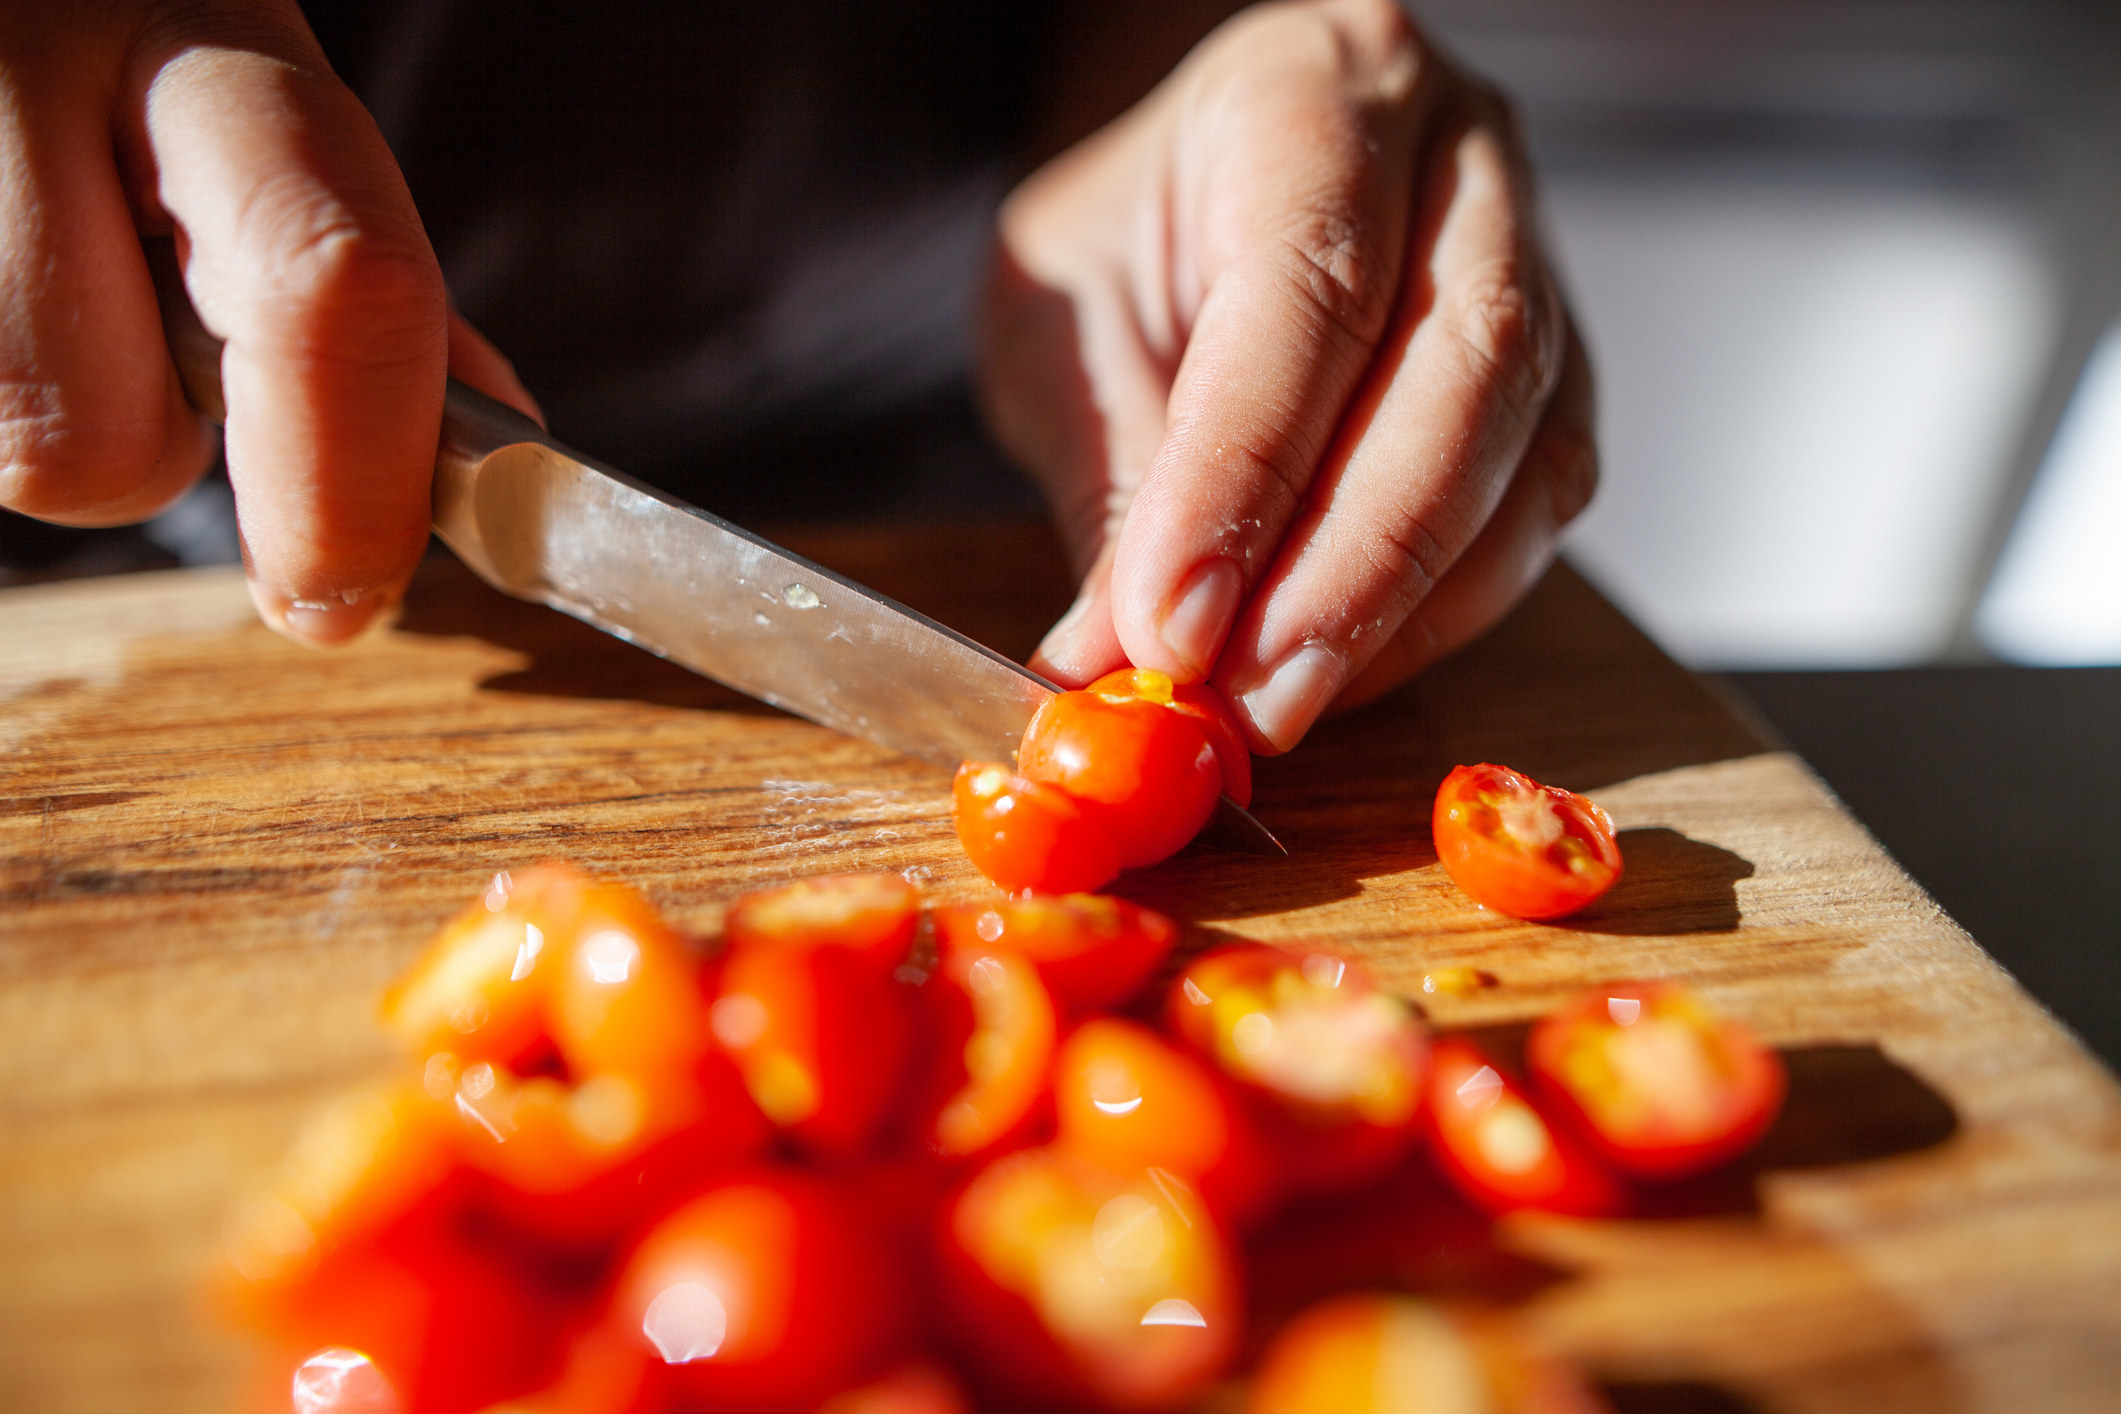 A person slicing cherry tomatoes